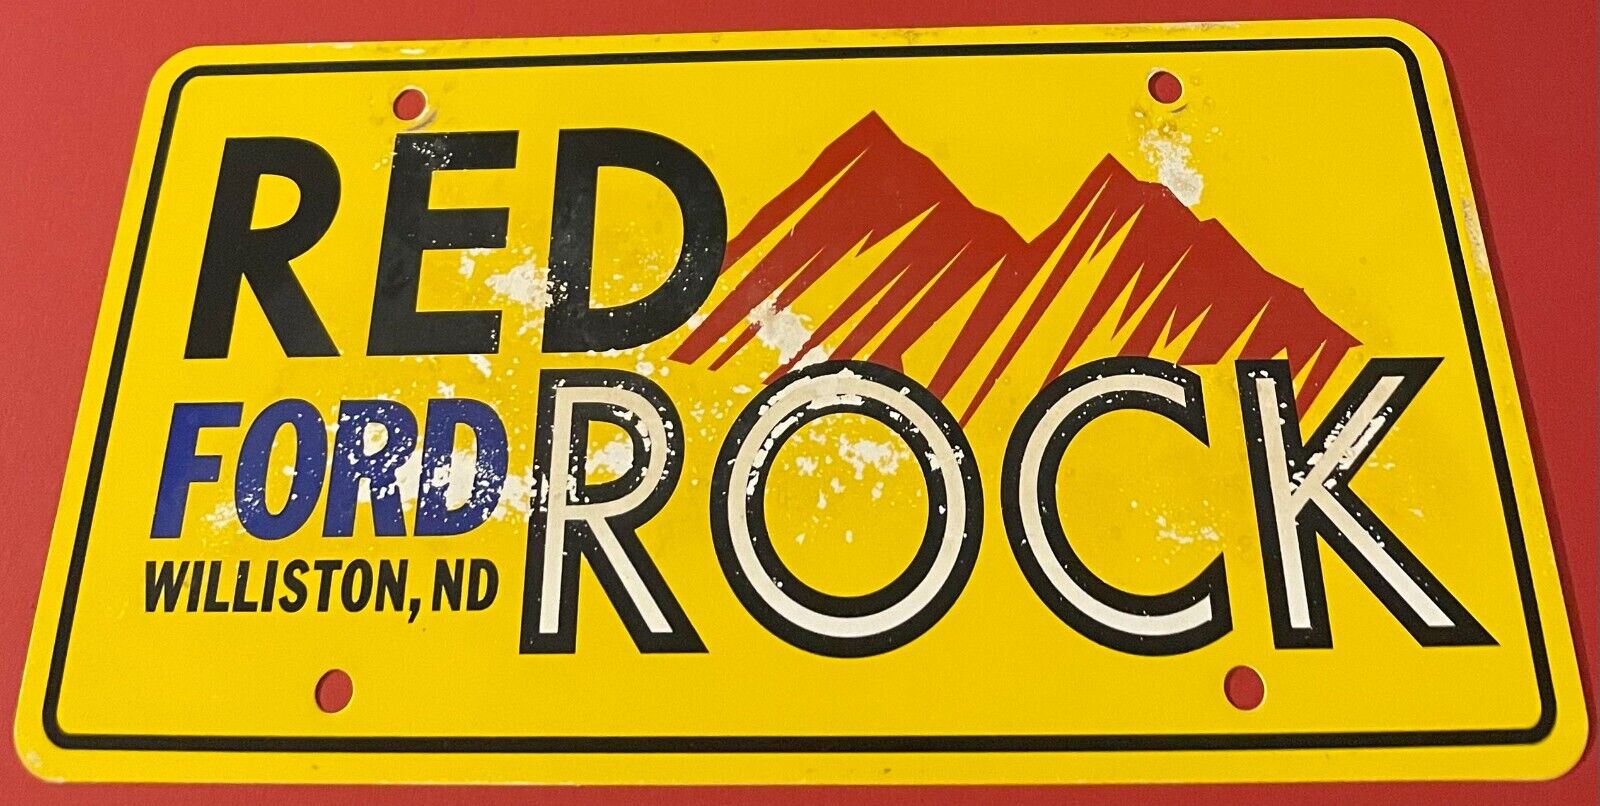 Red Rock Ford Dealership Booster License Plate Williston ND THIN PLASTIC